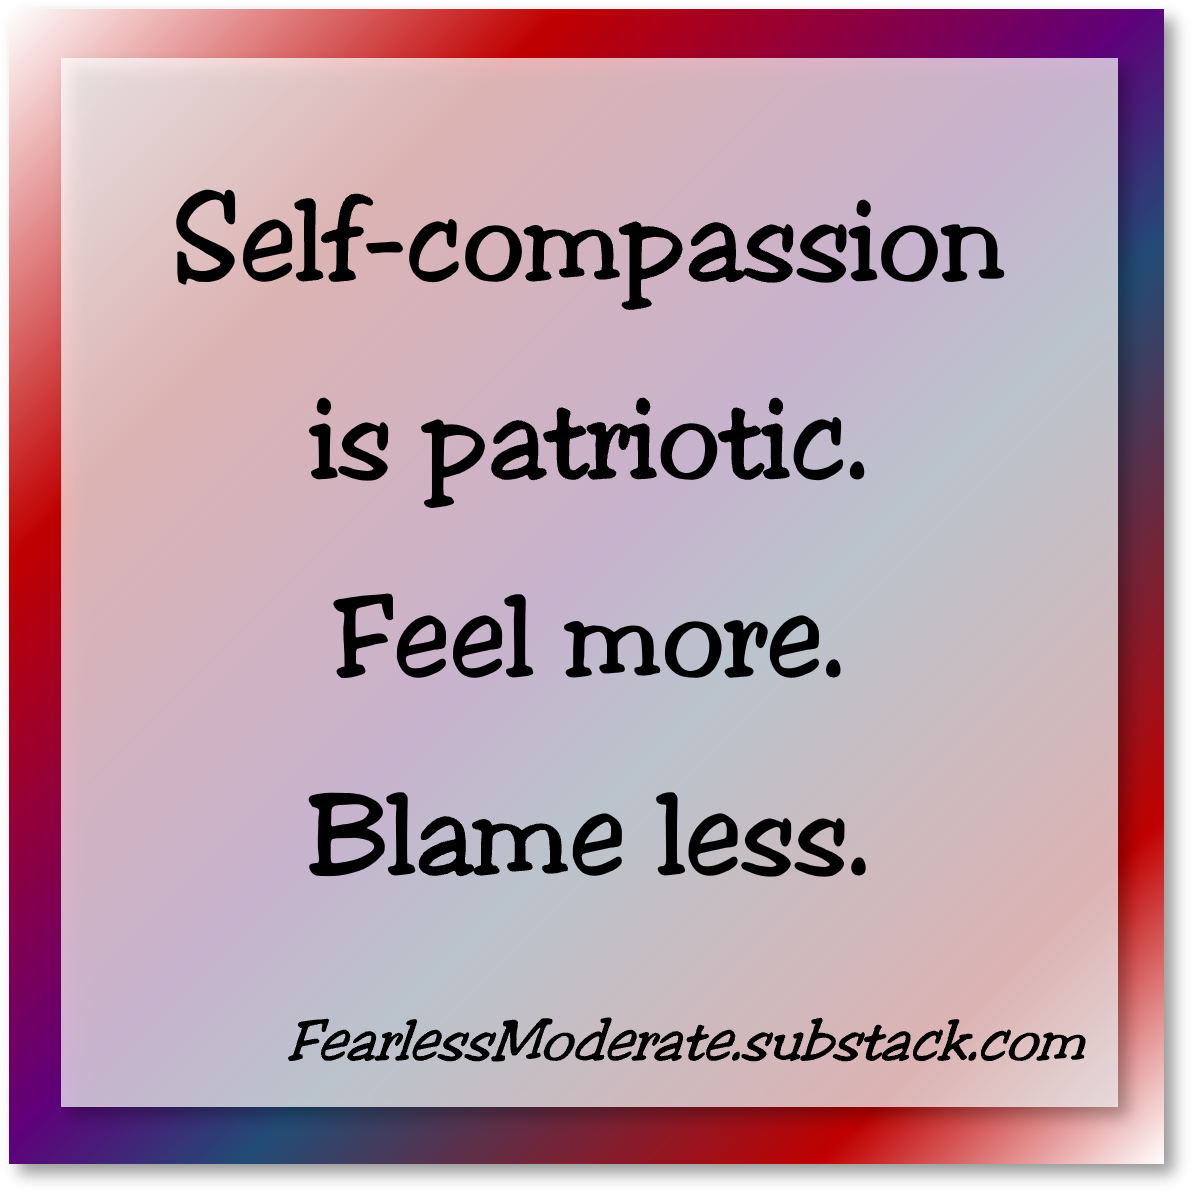 Self-compassion is patriotic. Feel more. Blame less.